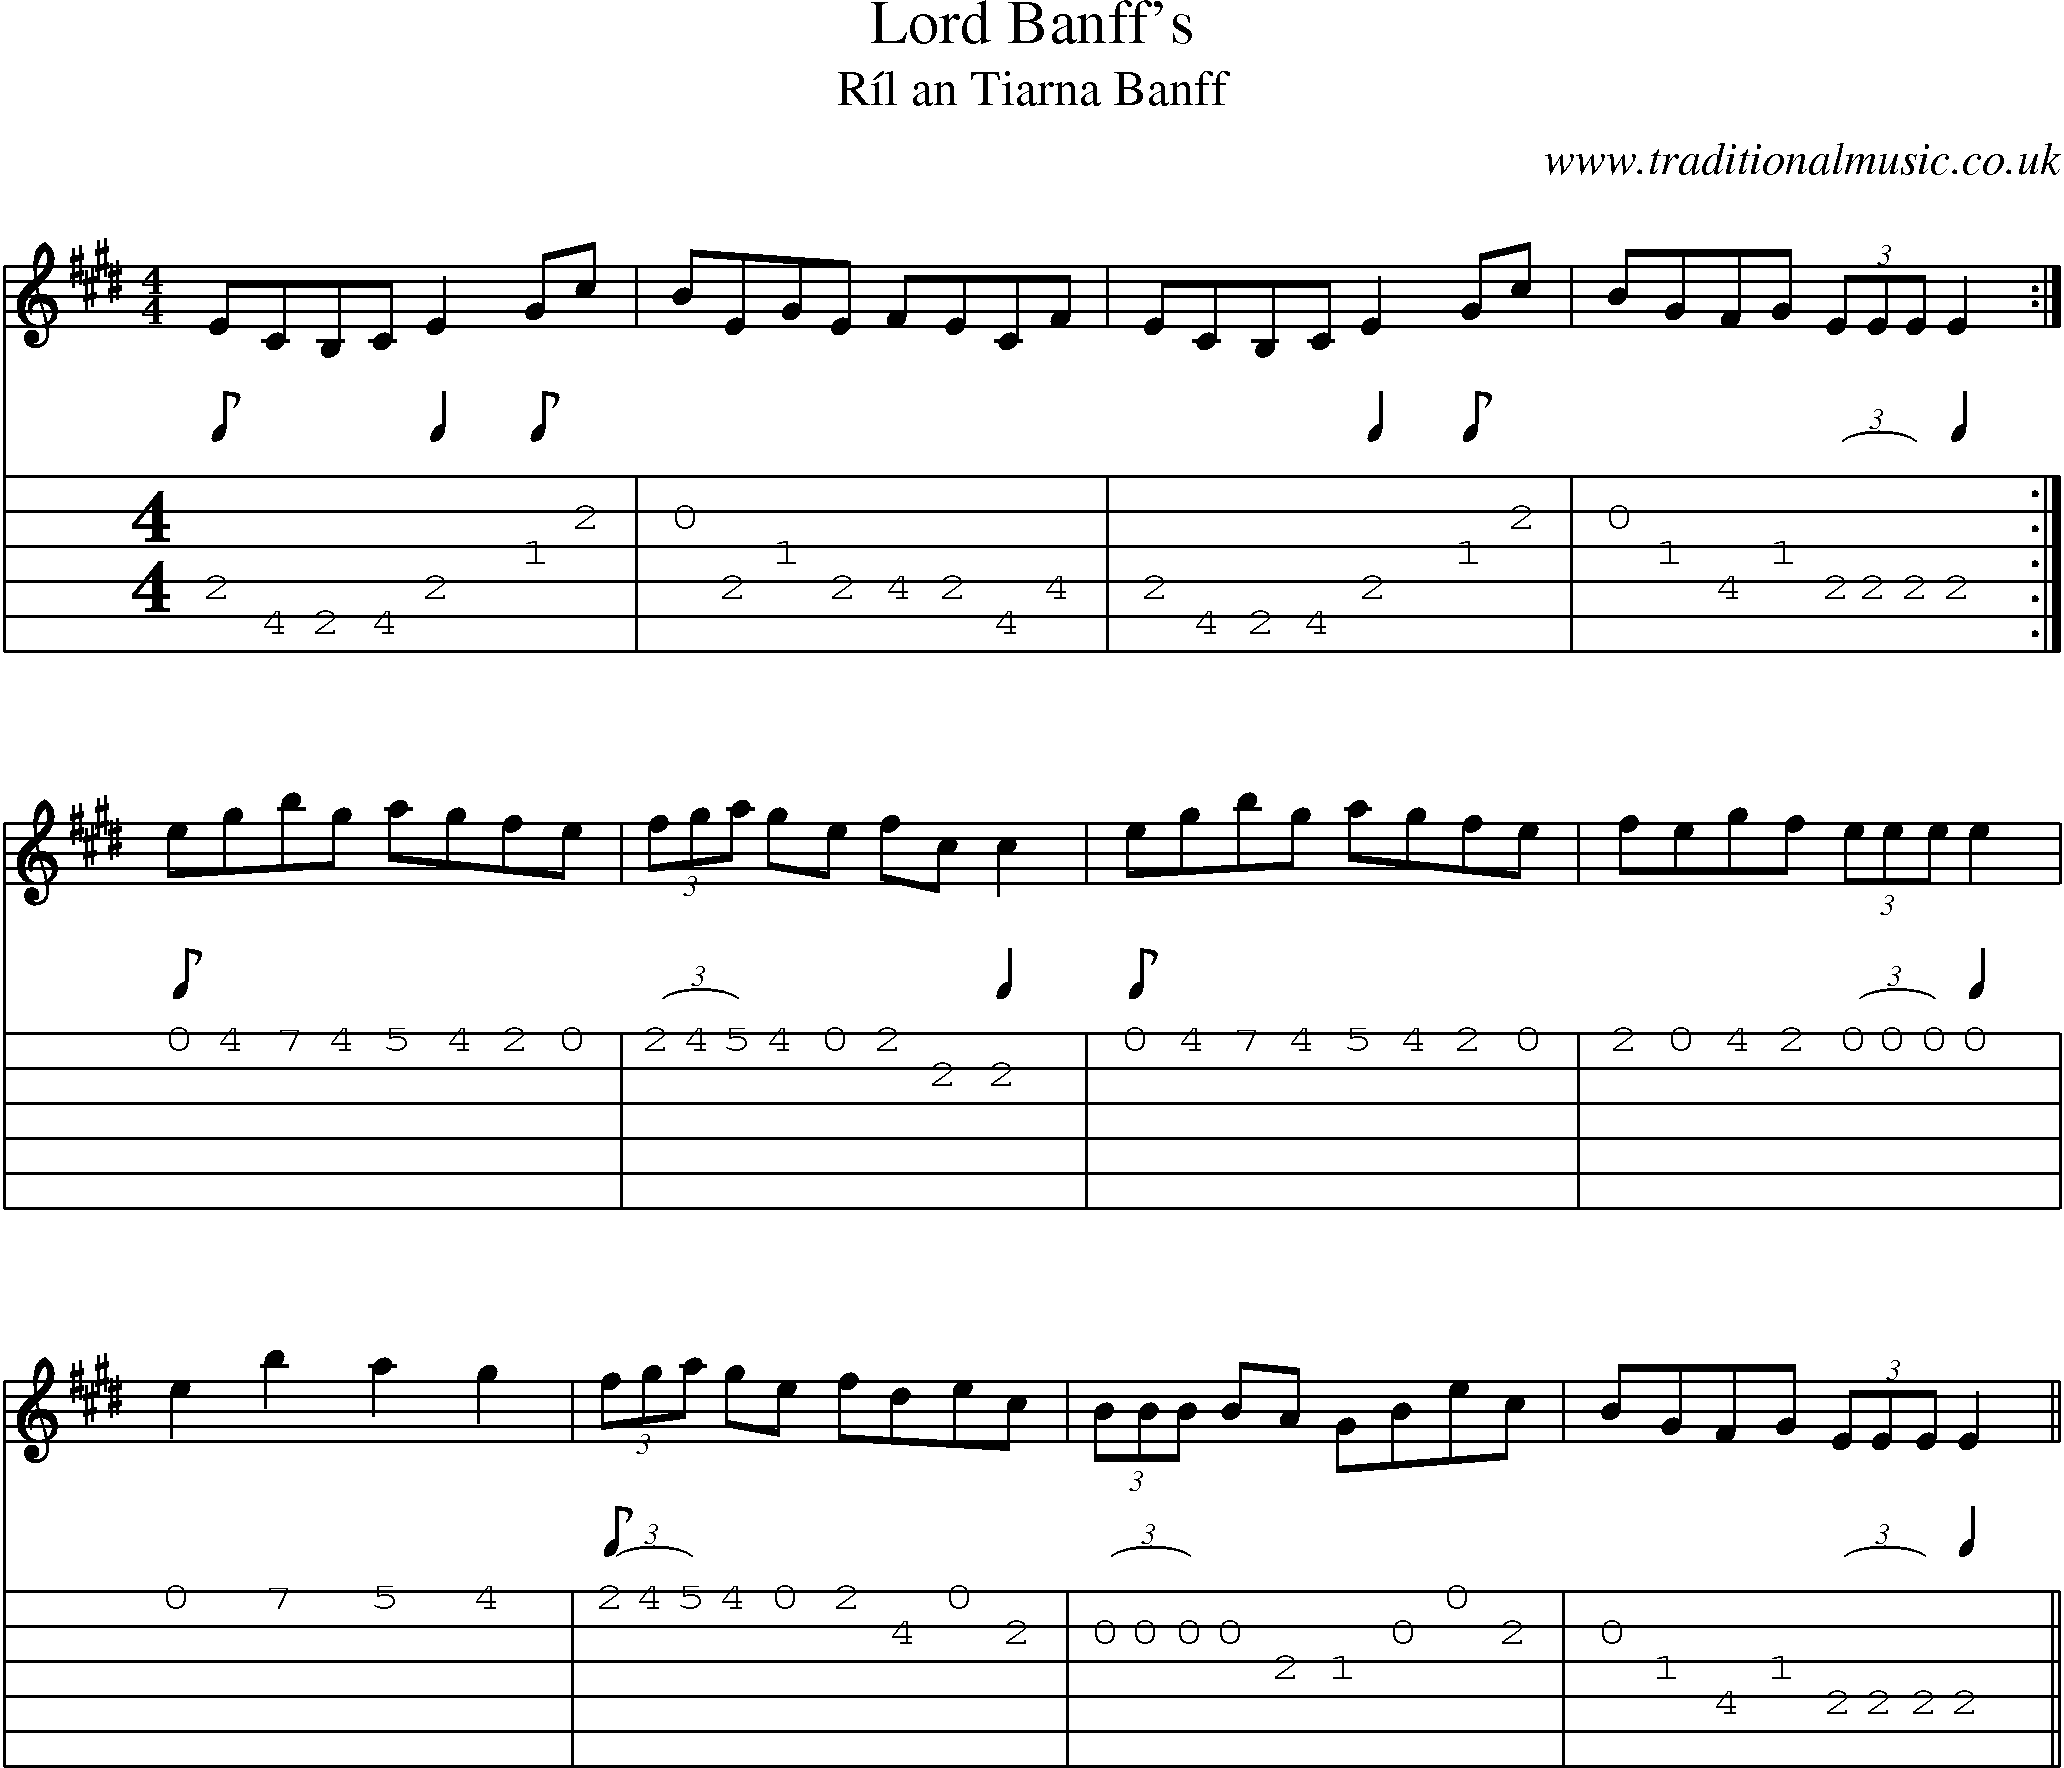 Music Score and Guitar Tabs for Lord Banffs